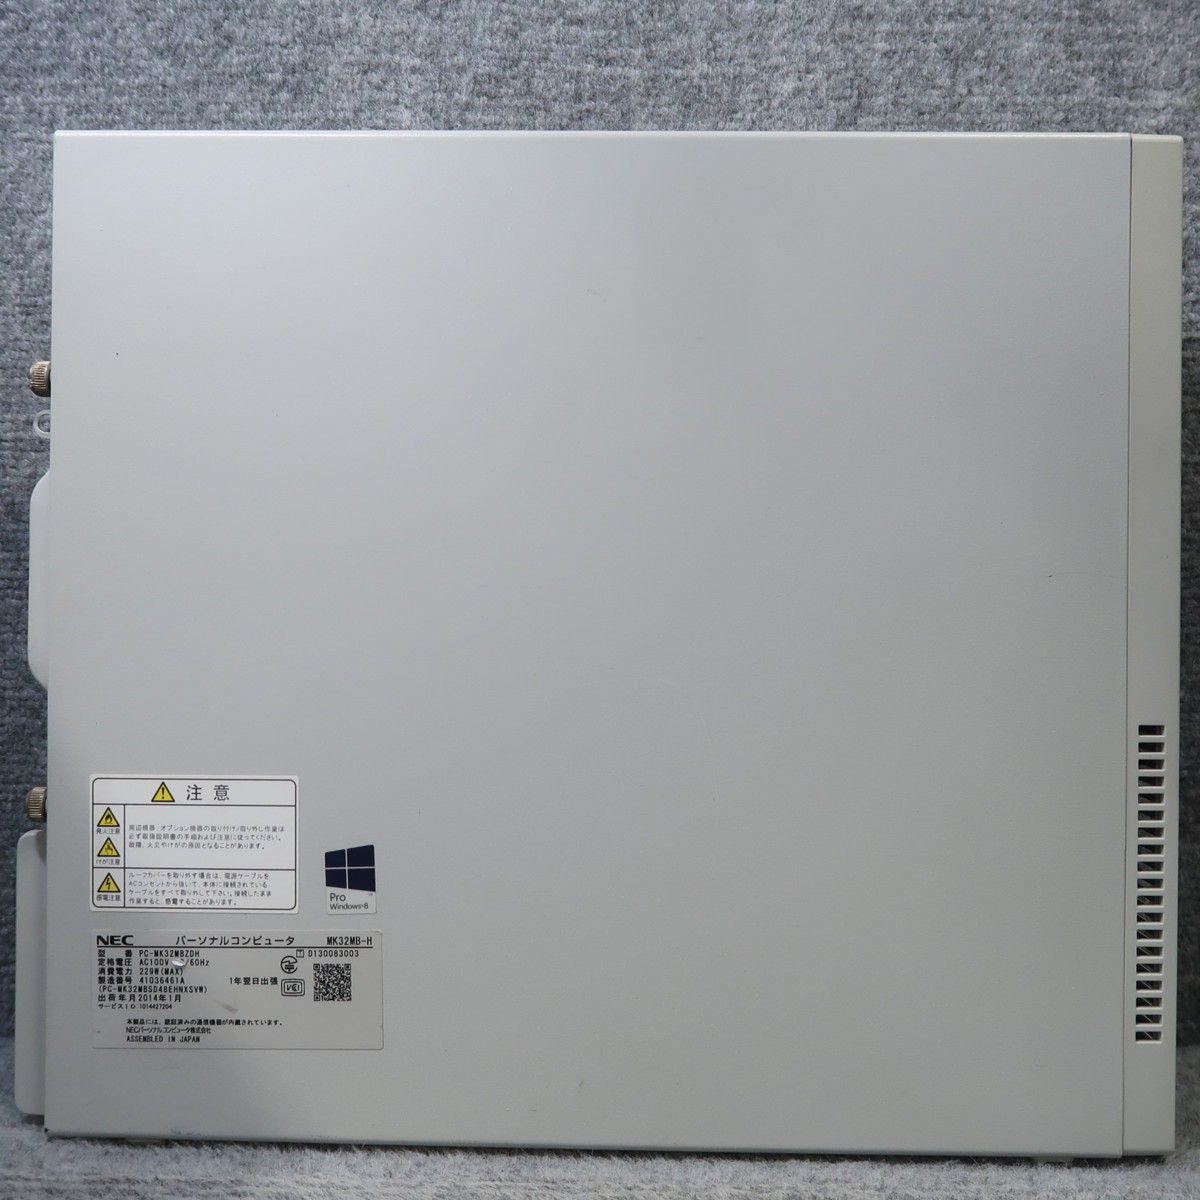 NEC Mate MB-H Core i5-4570 3.2GHz 2GB DVD-ROM ジャンク A53858_画像2